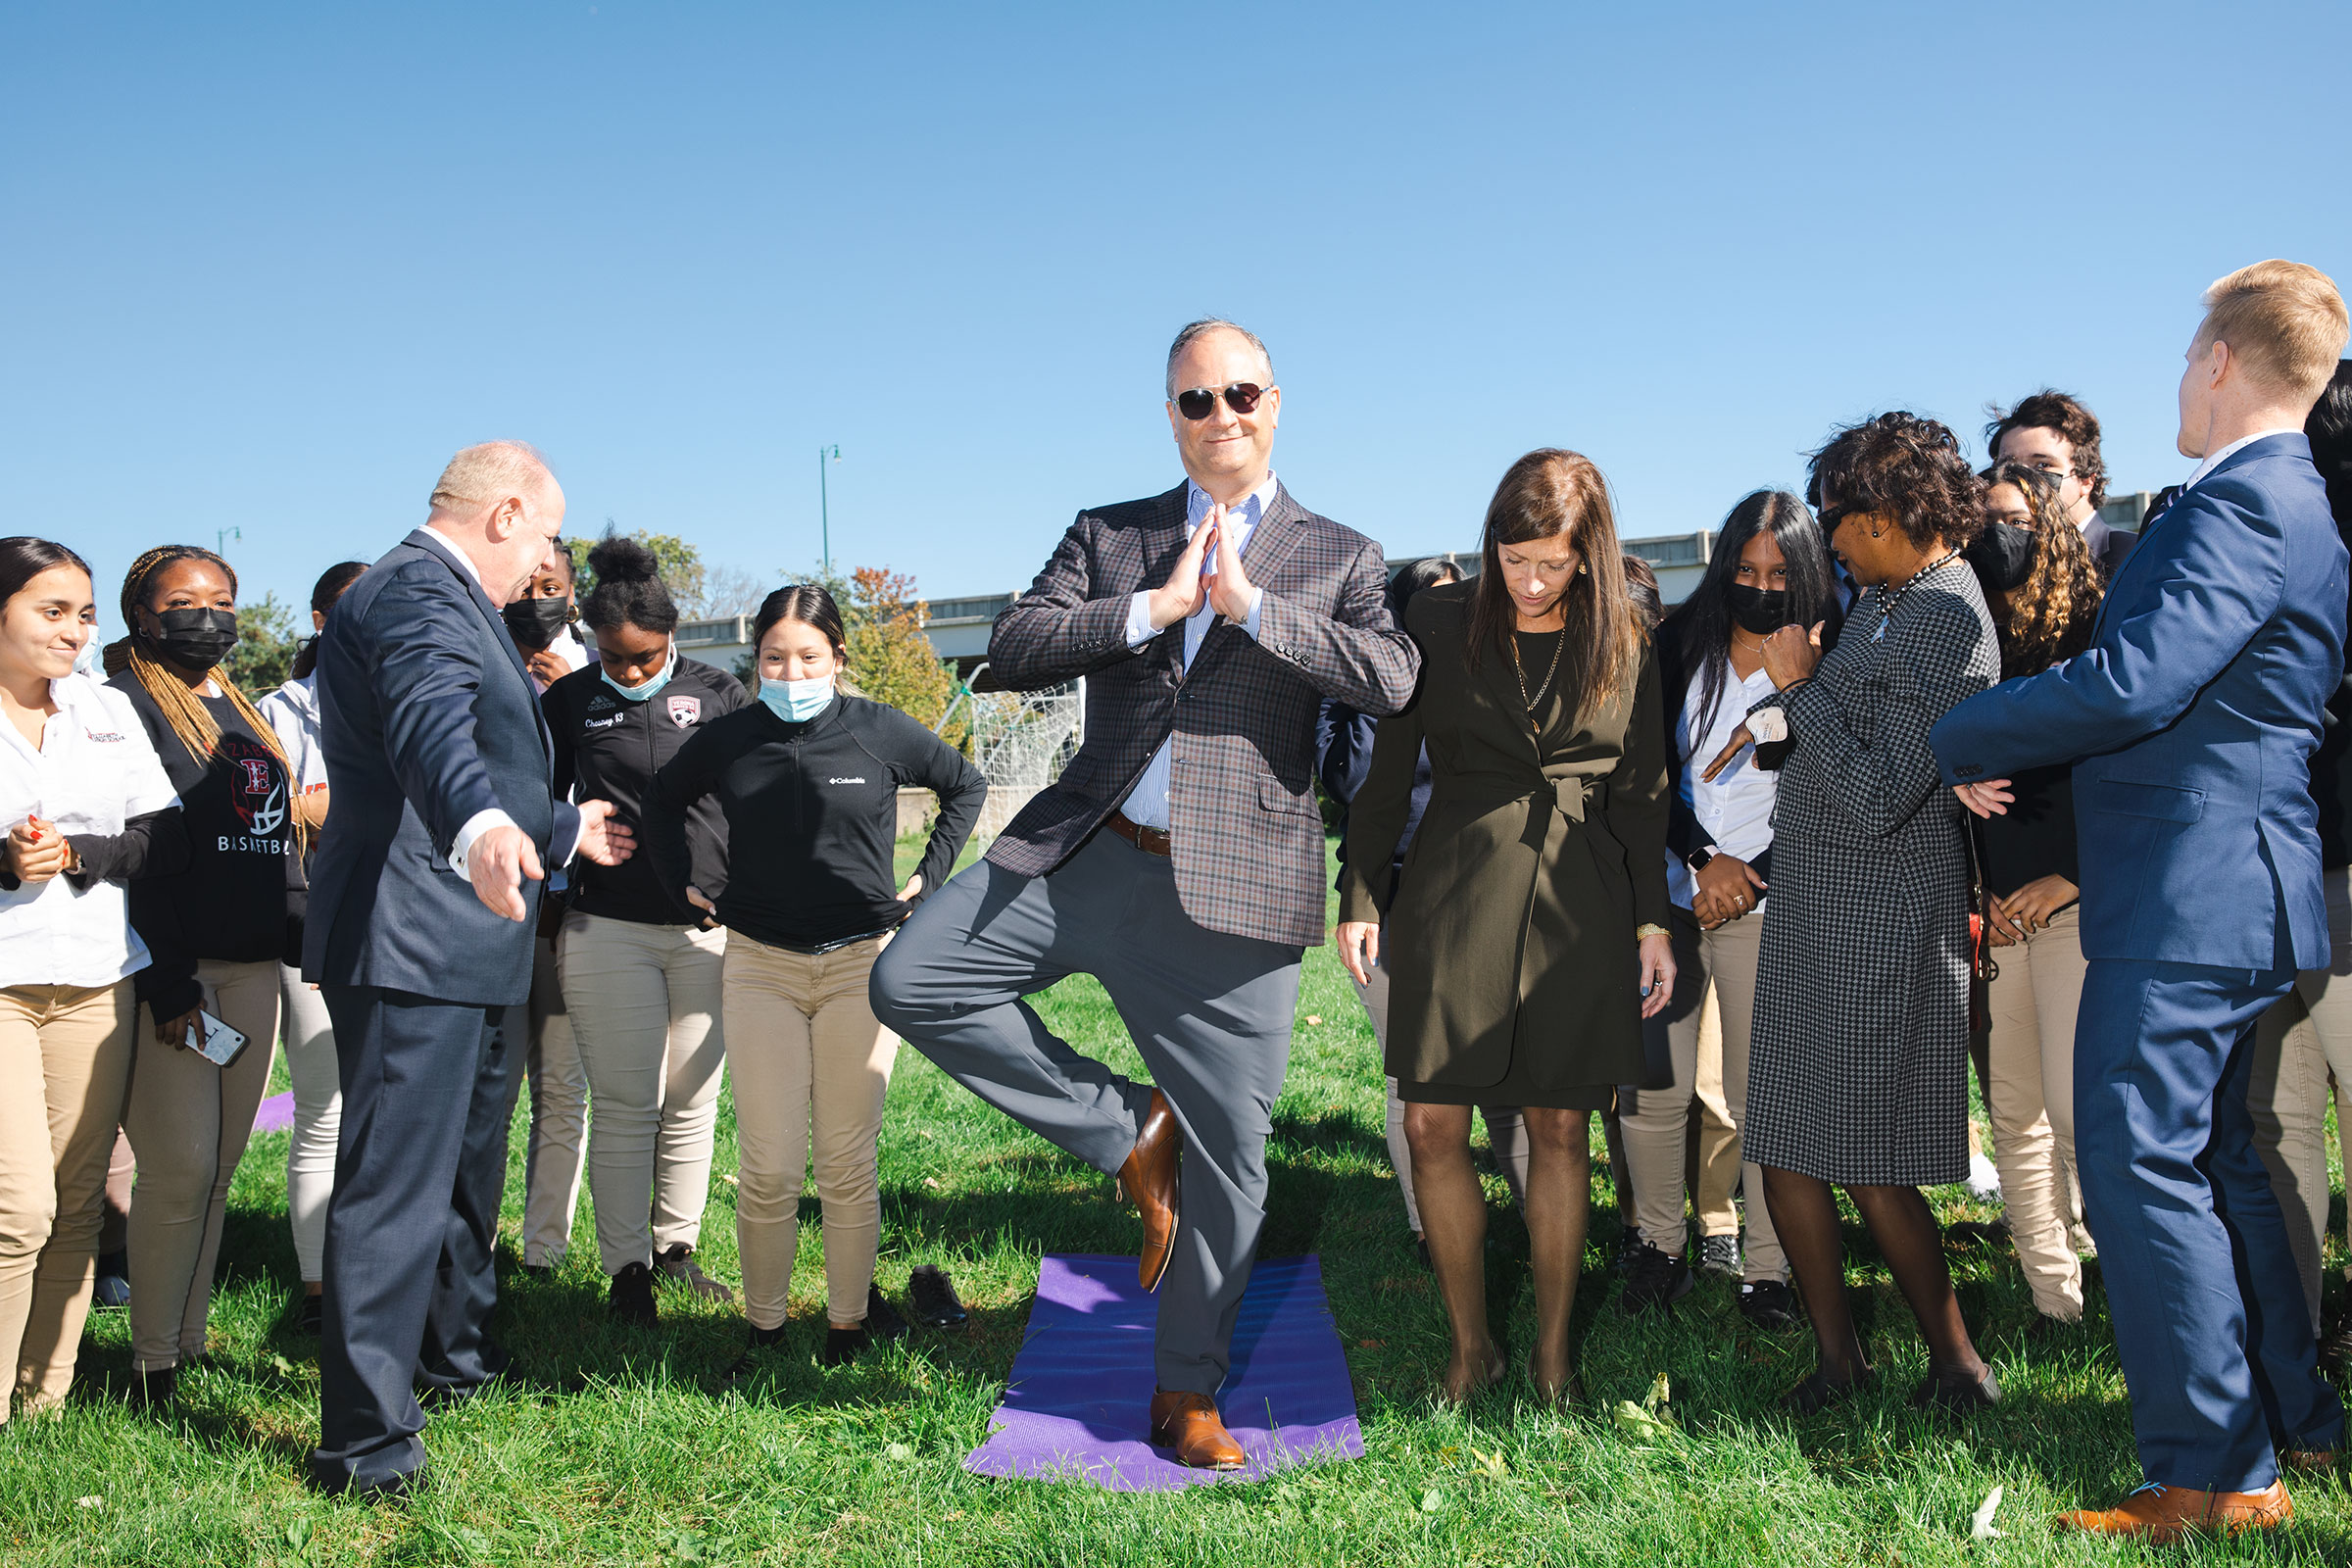 Second Gentleman <a href="https://time.com/6114517/doug-emhoff-second-gentleman-interview/">Doug Emhoff</a>, the husband of Vice President Kamala Harris, practices his tree pose with a yoga class during a visit to New Jersey on Oct. 19. (Landon Nordeman for TIME)